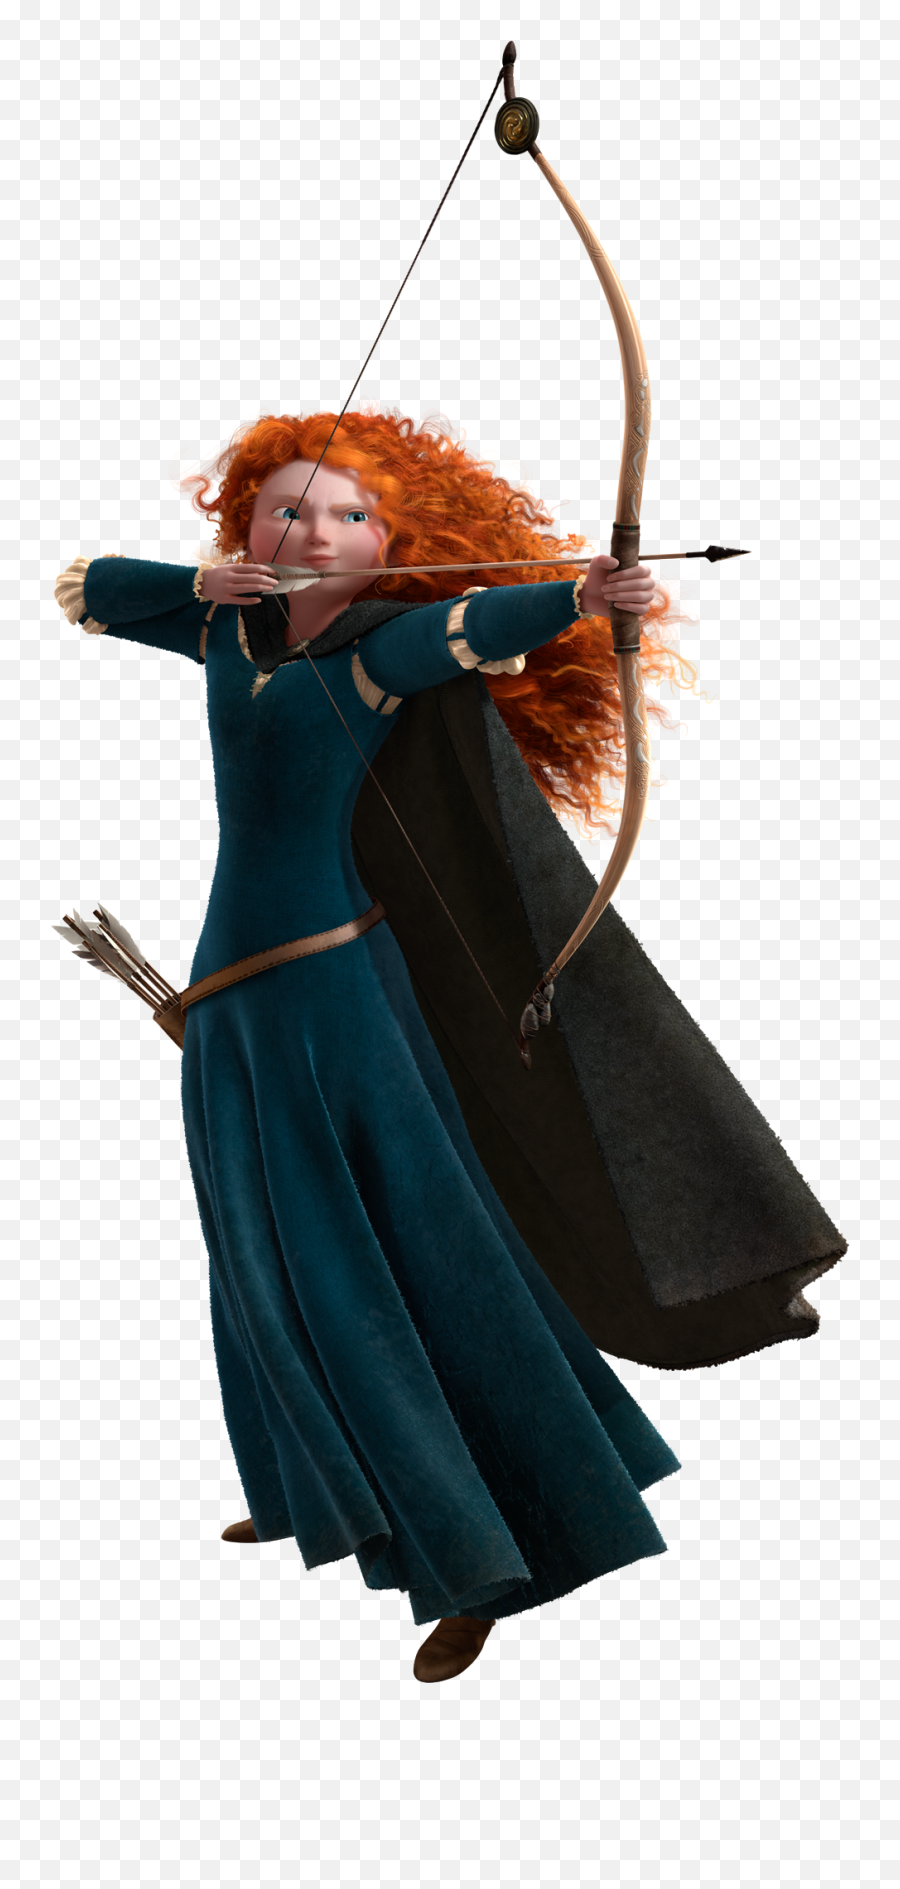 Meridas Bow - Merida Bow And Arrow Png,Brave Png